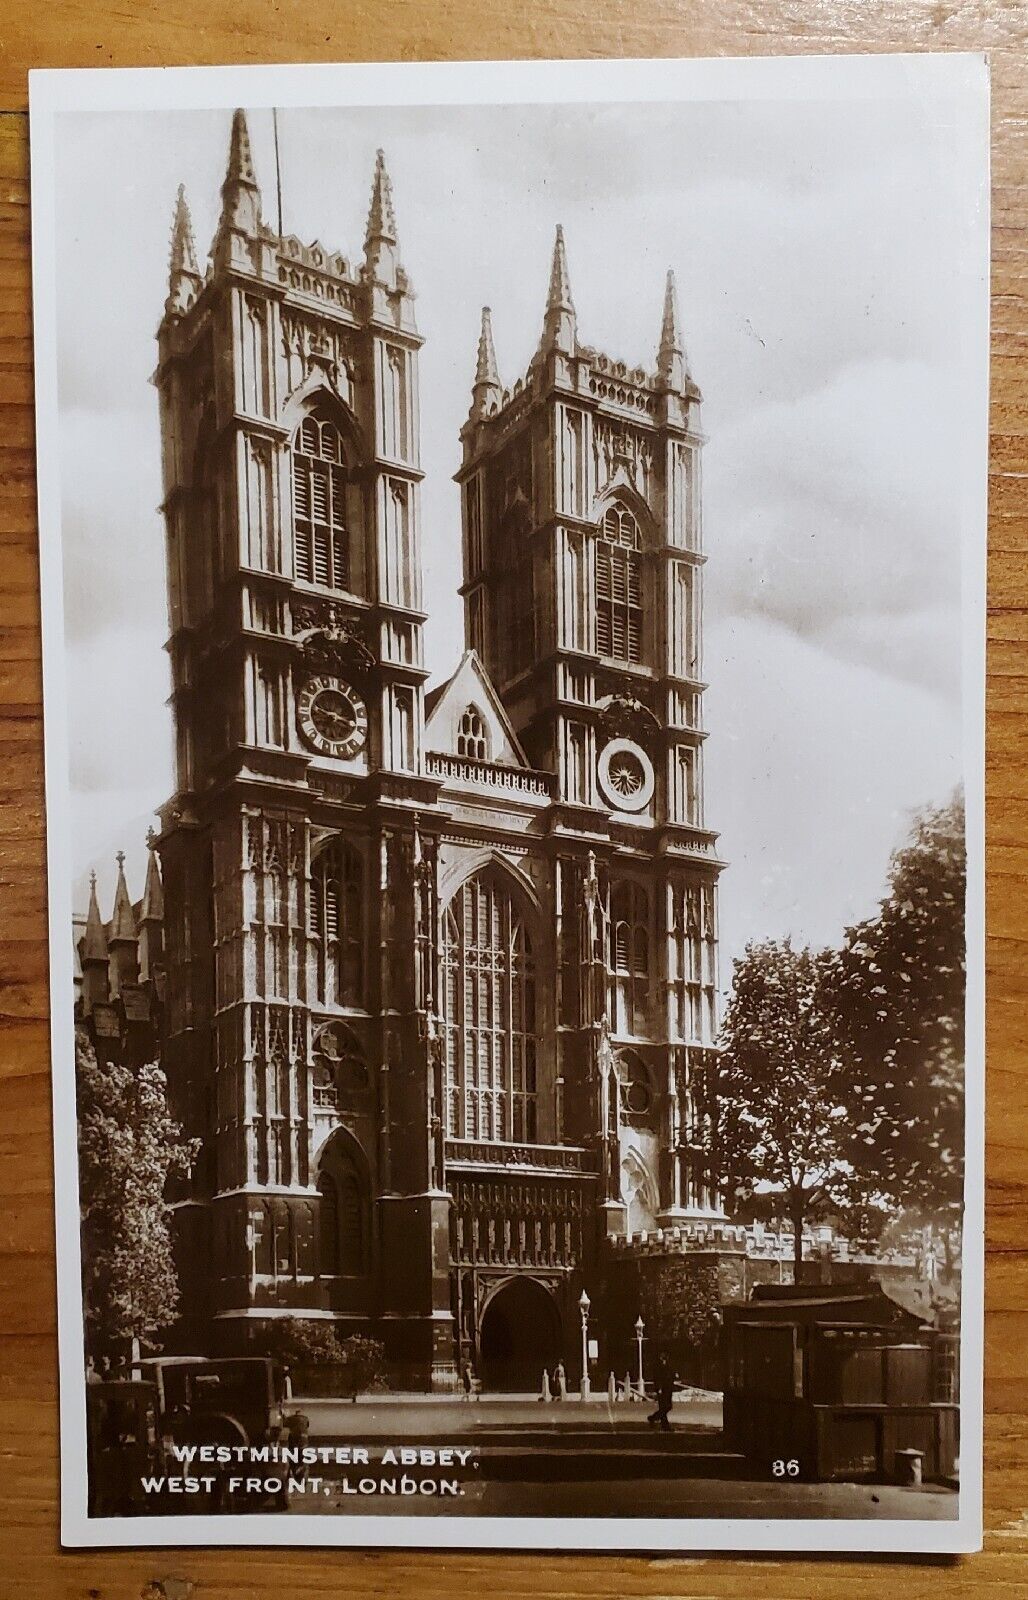 London England Westminster Abbey And Buckingham Palace Excel Series VNG BW RPPC